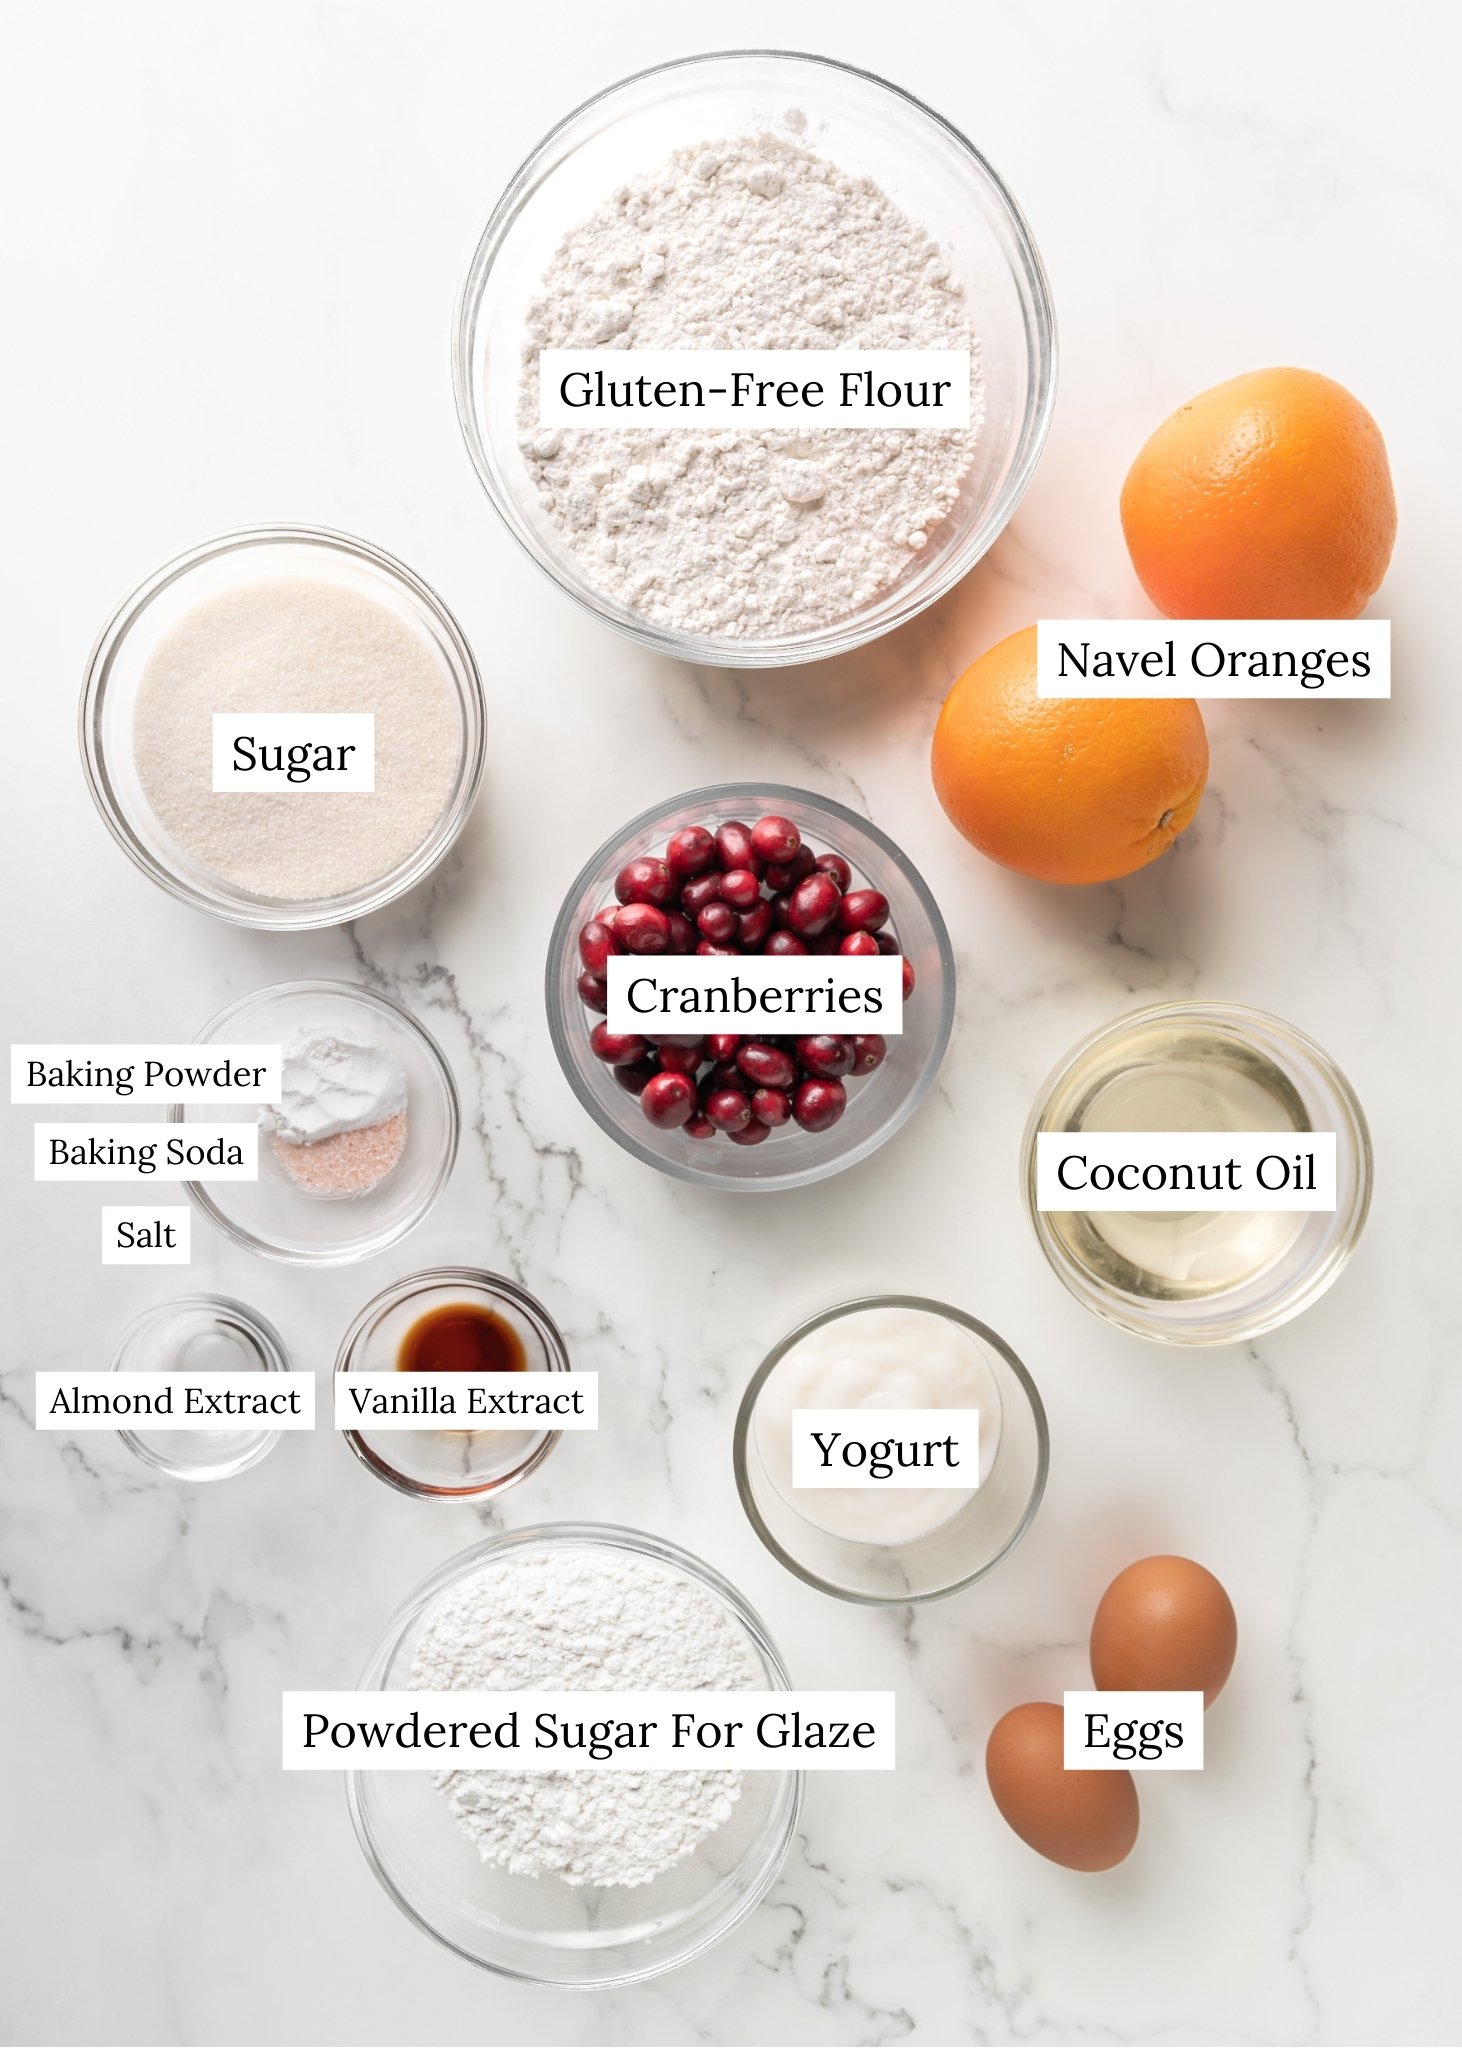 Gluten-Free cranberry orange bread ingredients. Gluten-free flour in a clear bowl with navel oranges, cranberries, leavening agents, oil yogurt, eggs, and powdered sugar. 